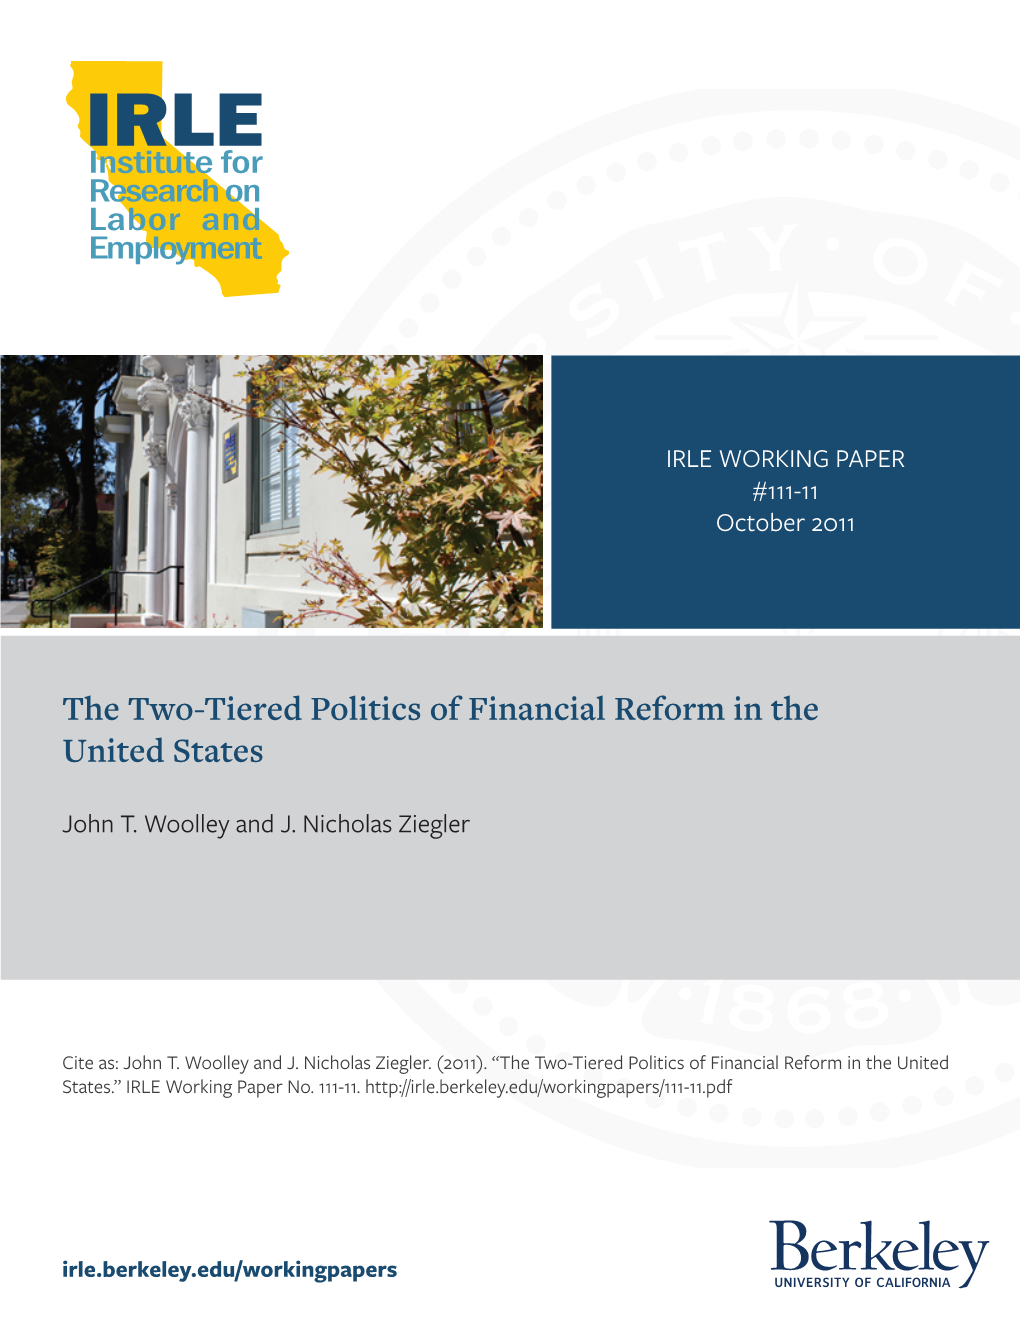 The Two-Tiered Politics of Financial Reform in the United States